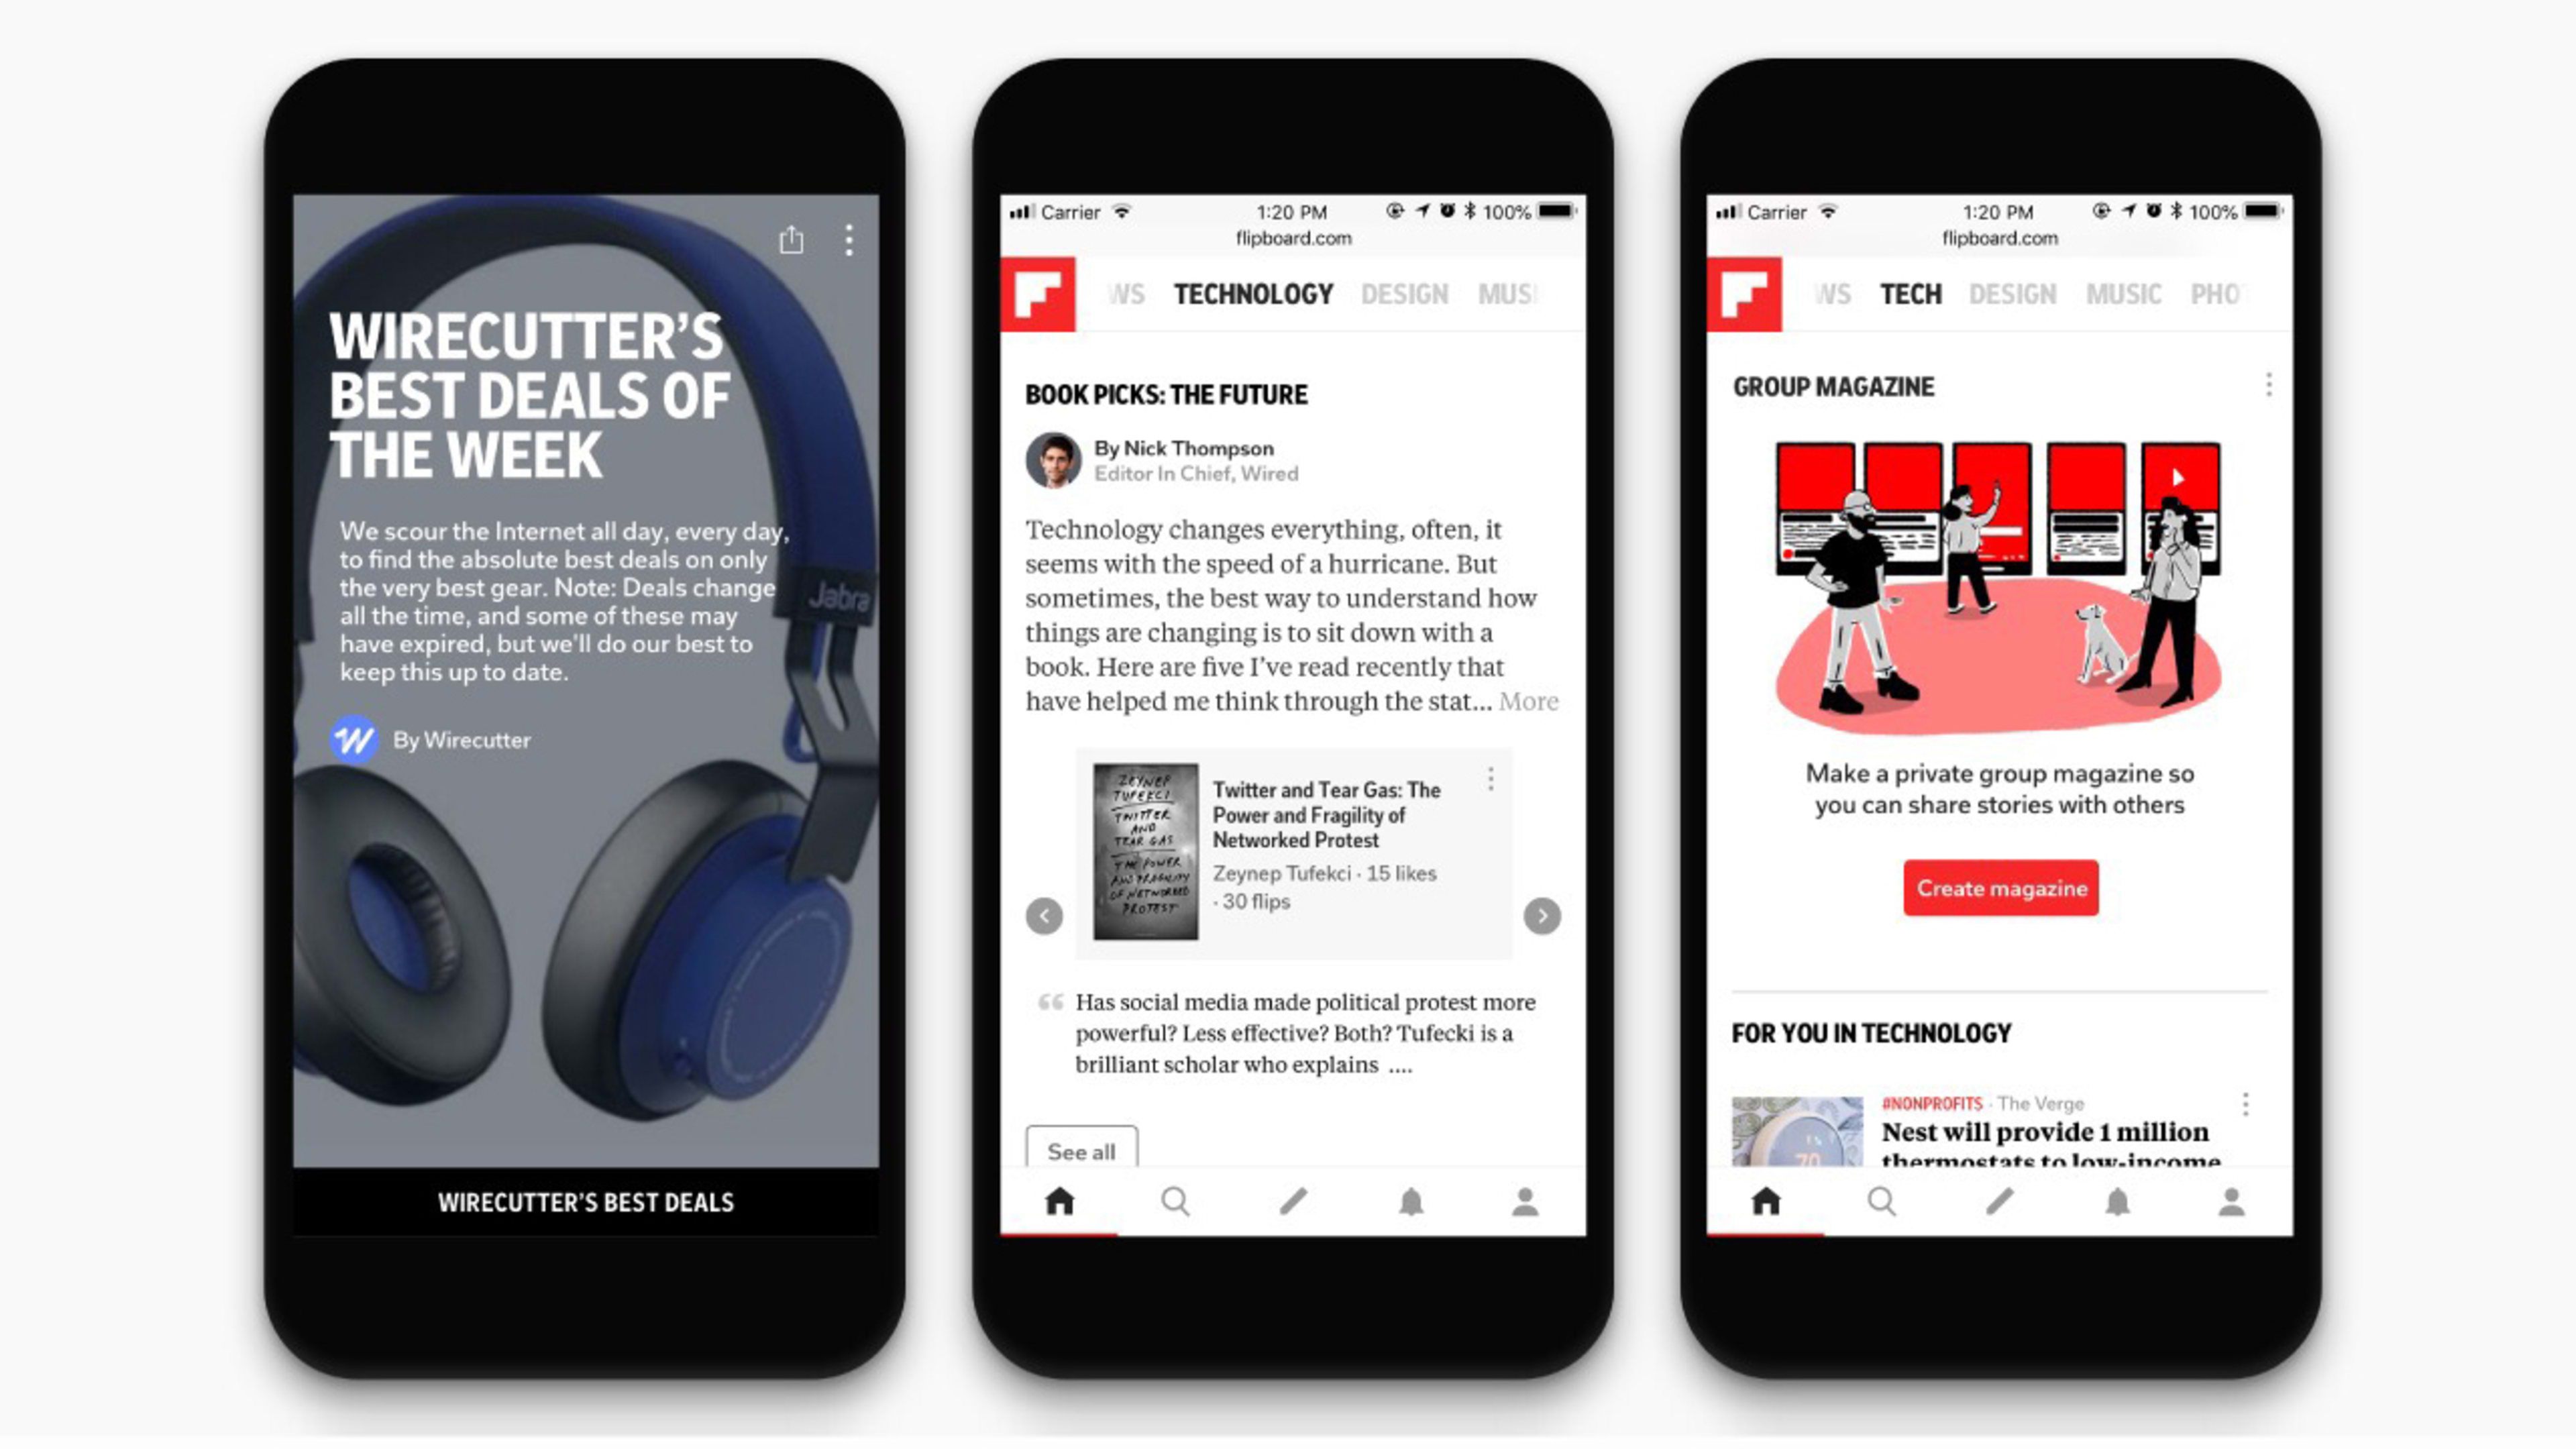 Flipboard Wants To Be The Go-To News Source For Tech Mavens